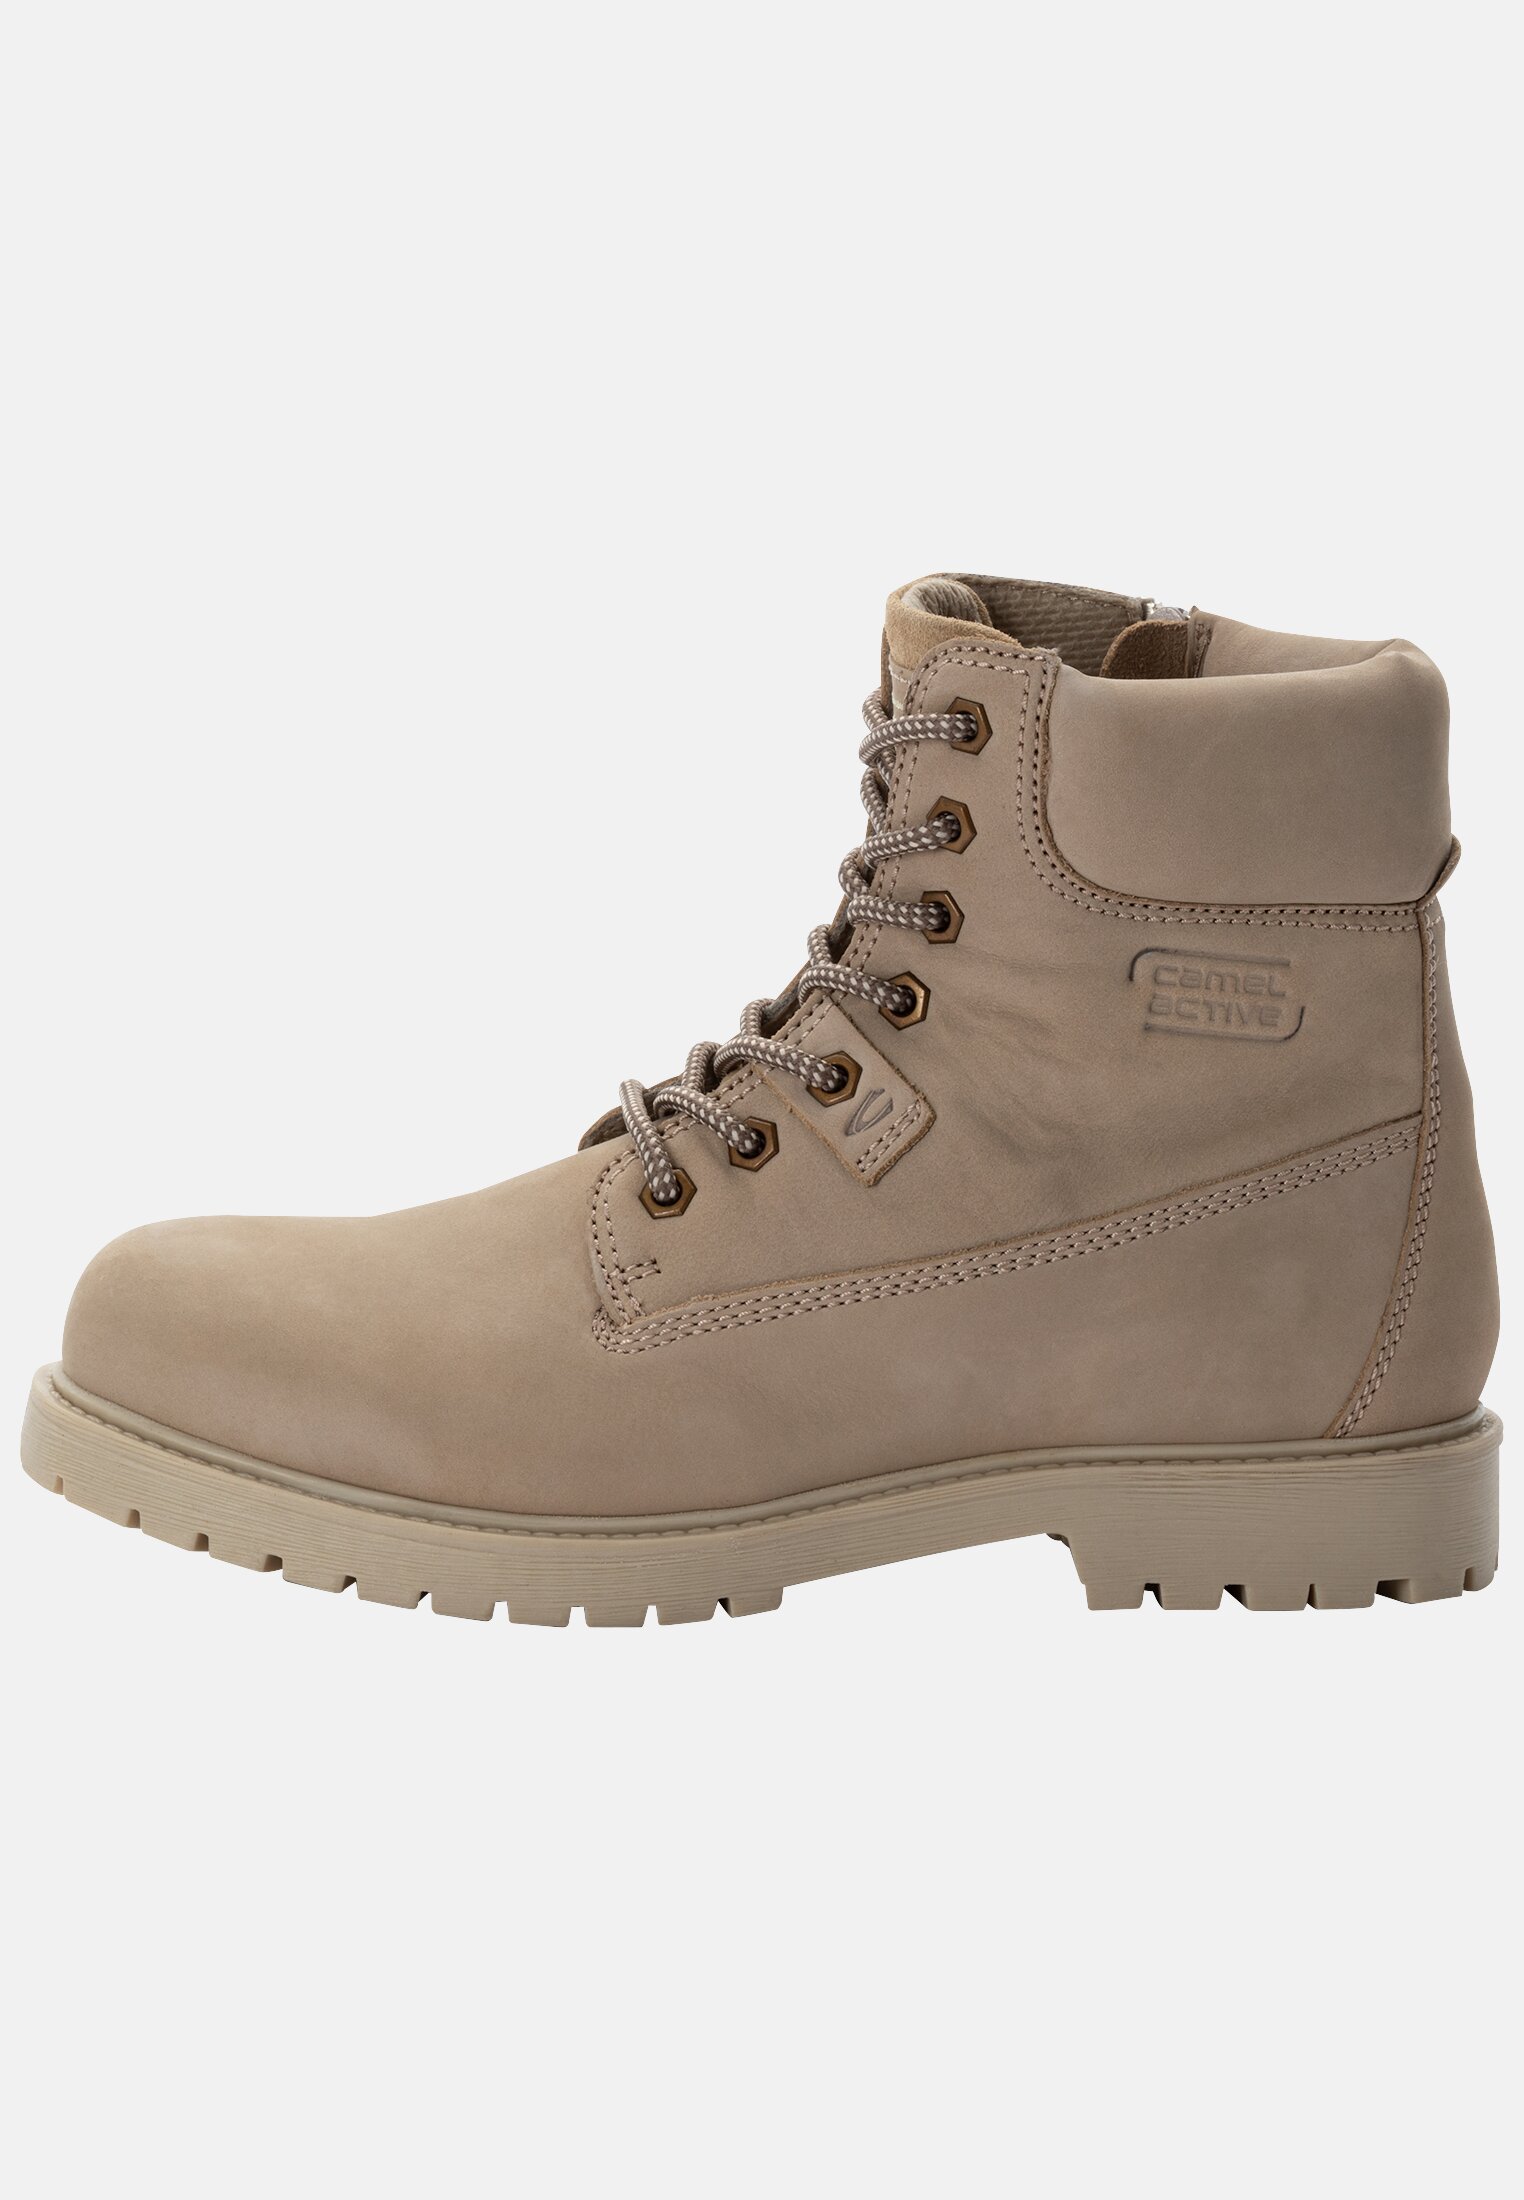 Camel Active Lace-up boot made of genuine leather